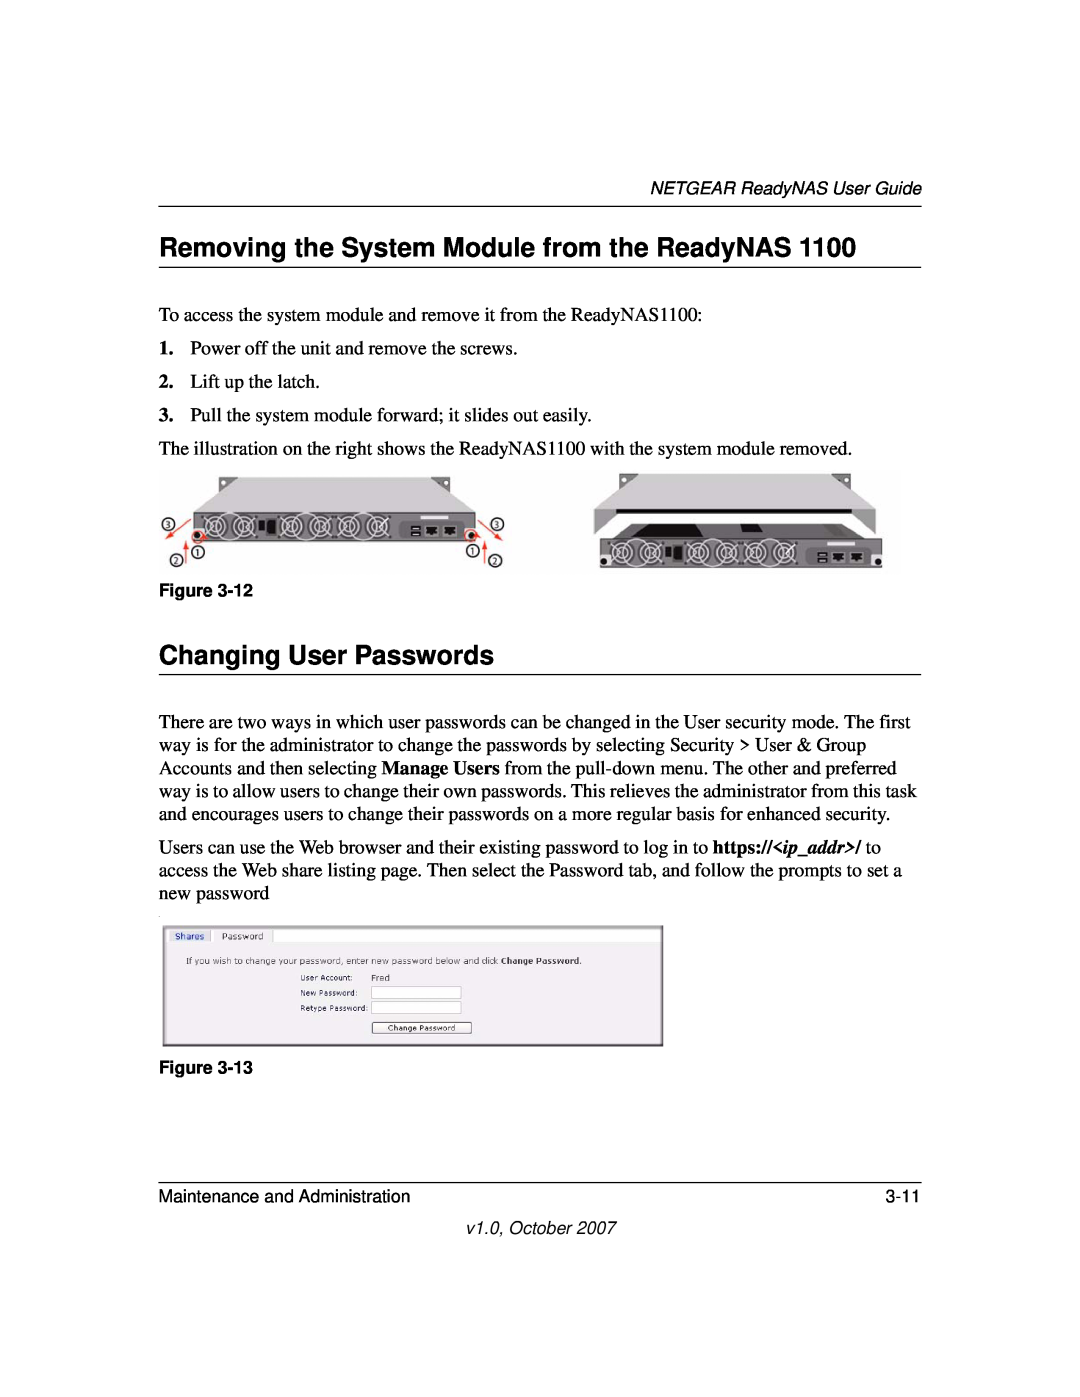 NETGEAR RN10400100NAS, RN31400-100NAS manual Removing the System Module from the ReadyNAS, Changing User Passwords 